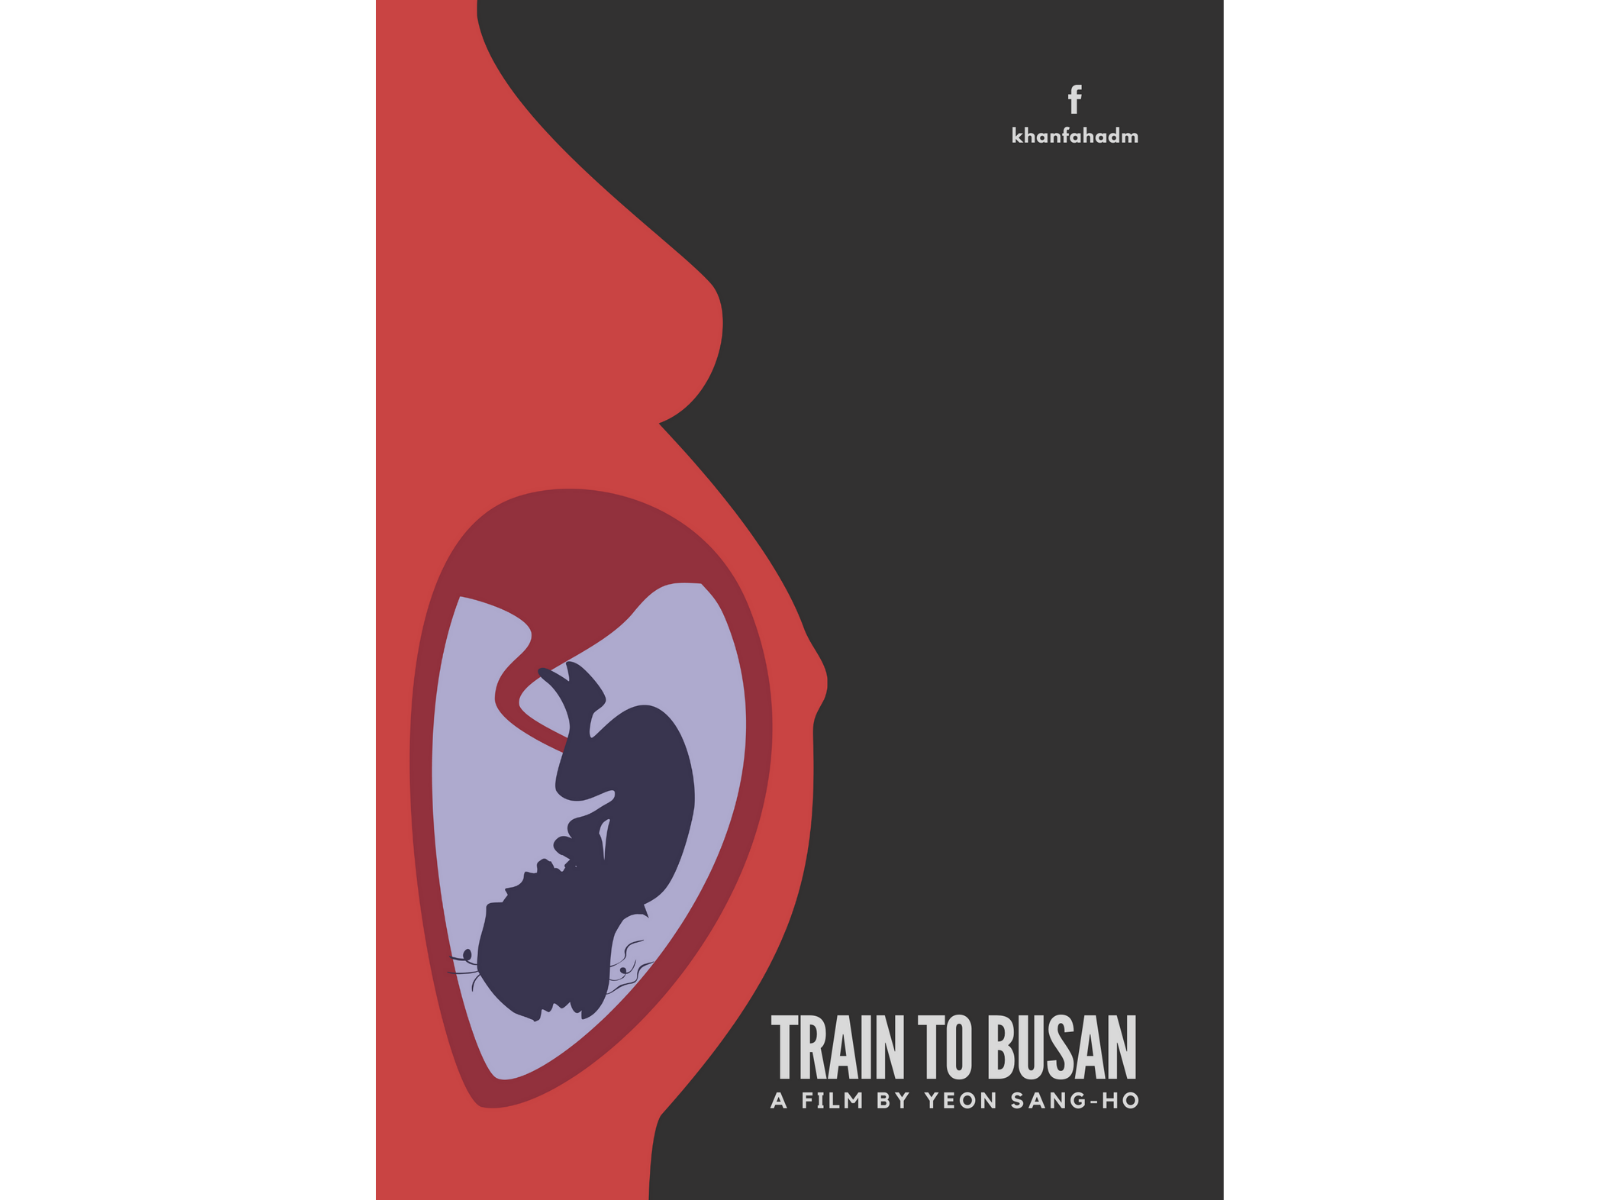 Train To Busan Minimal Poster By Fahad Khan On Dribbble